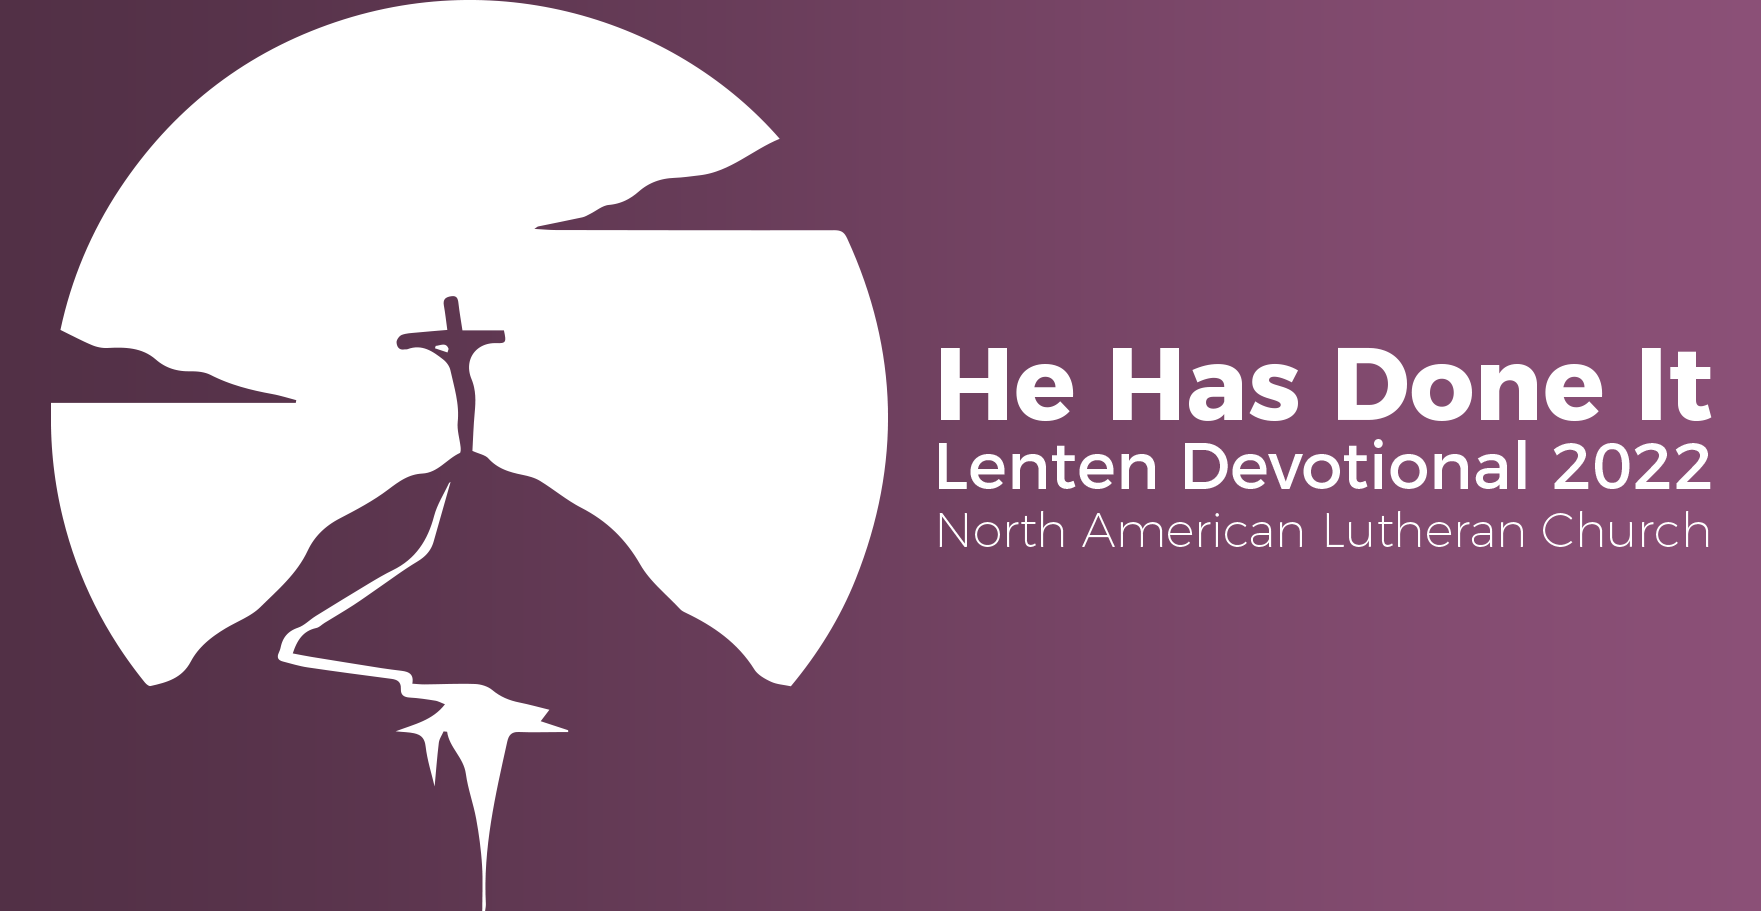 March 11, 2022 | Friday of the Week of Lent I